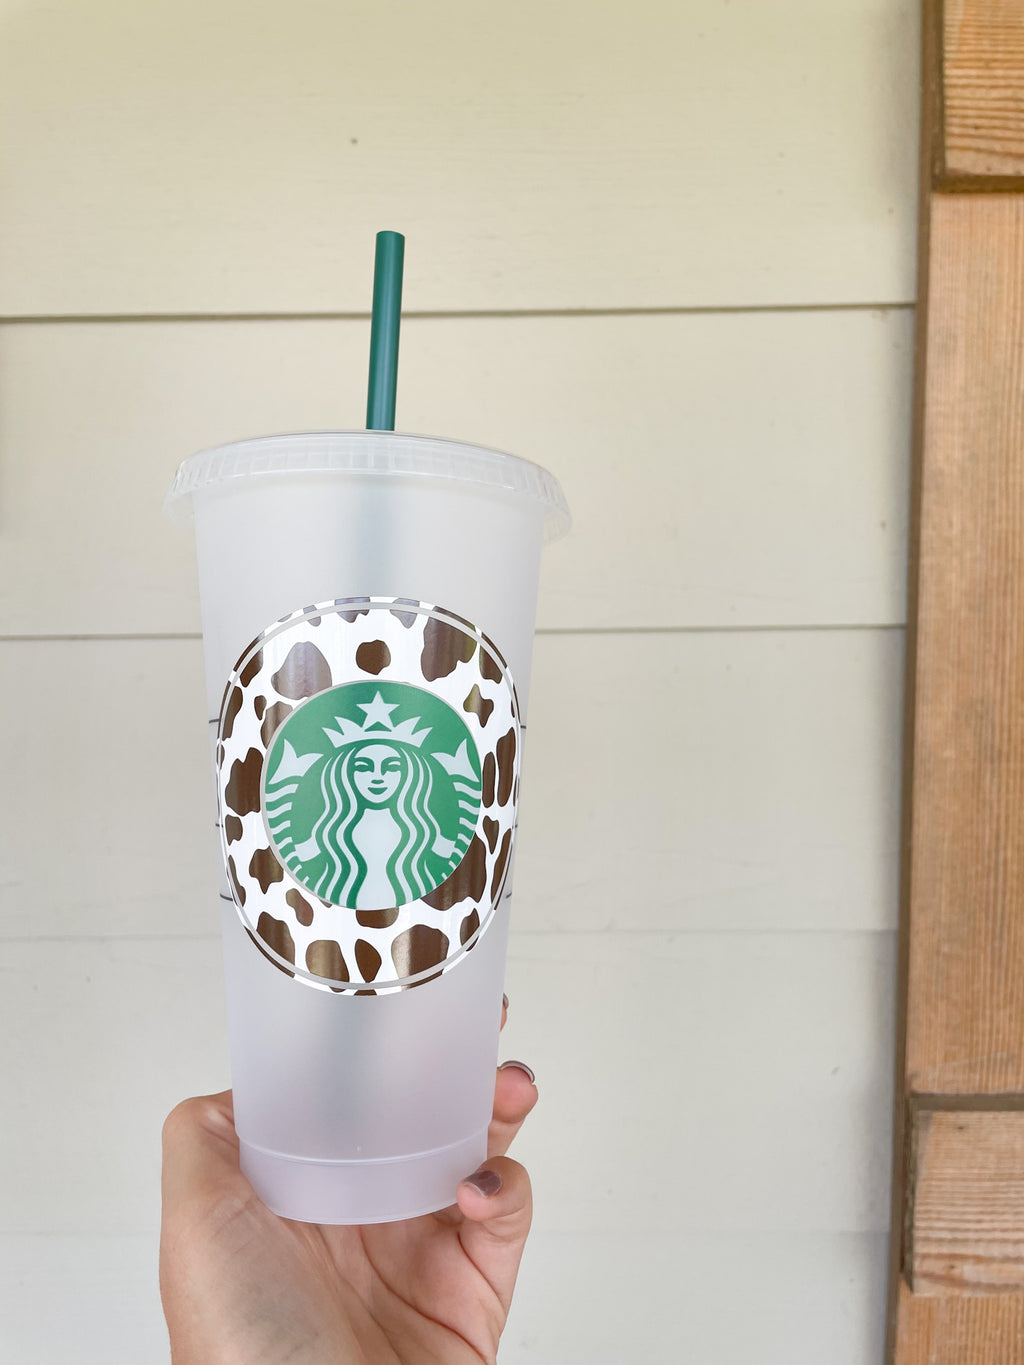 NEW Ox Cow Straw Mint Straw Topper Cover Holding Starbucks Hot Cup Drink